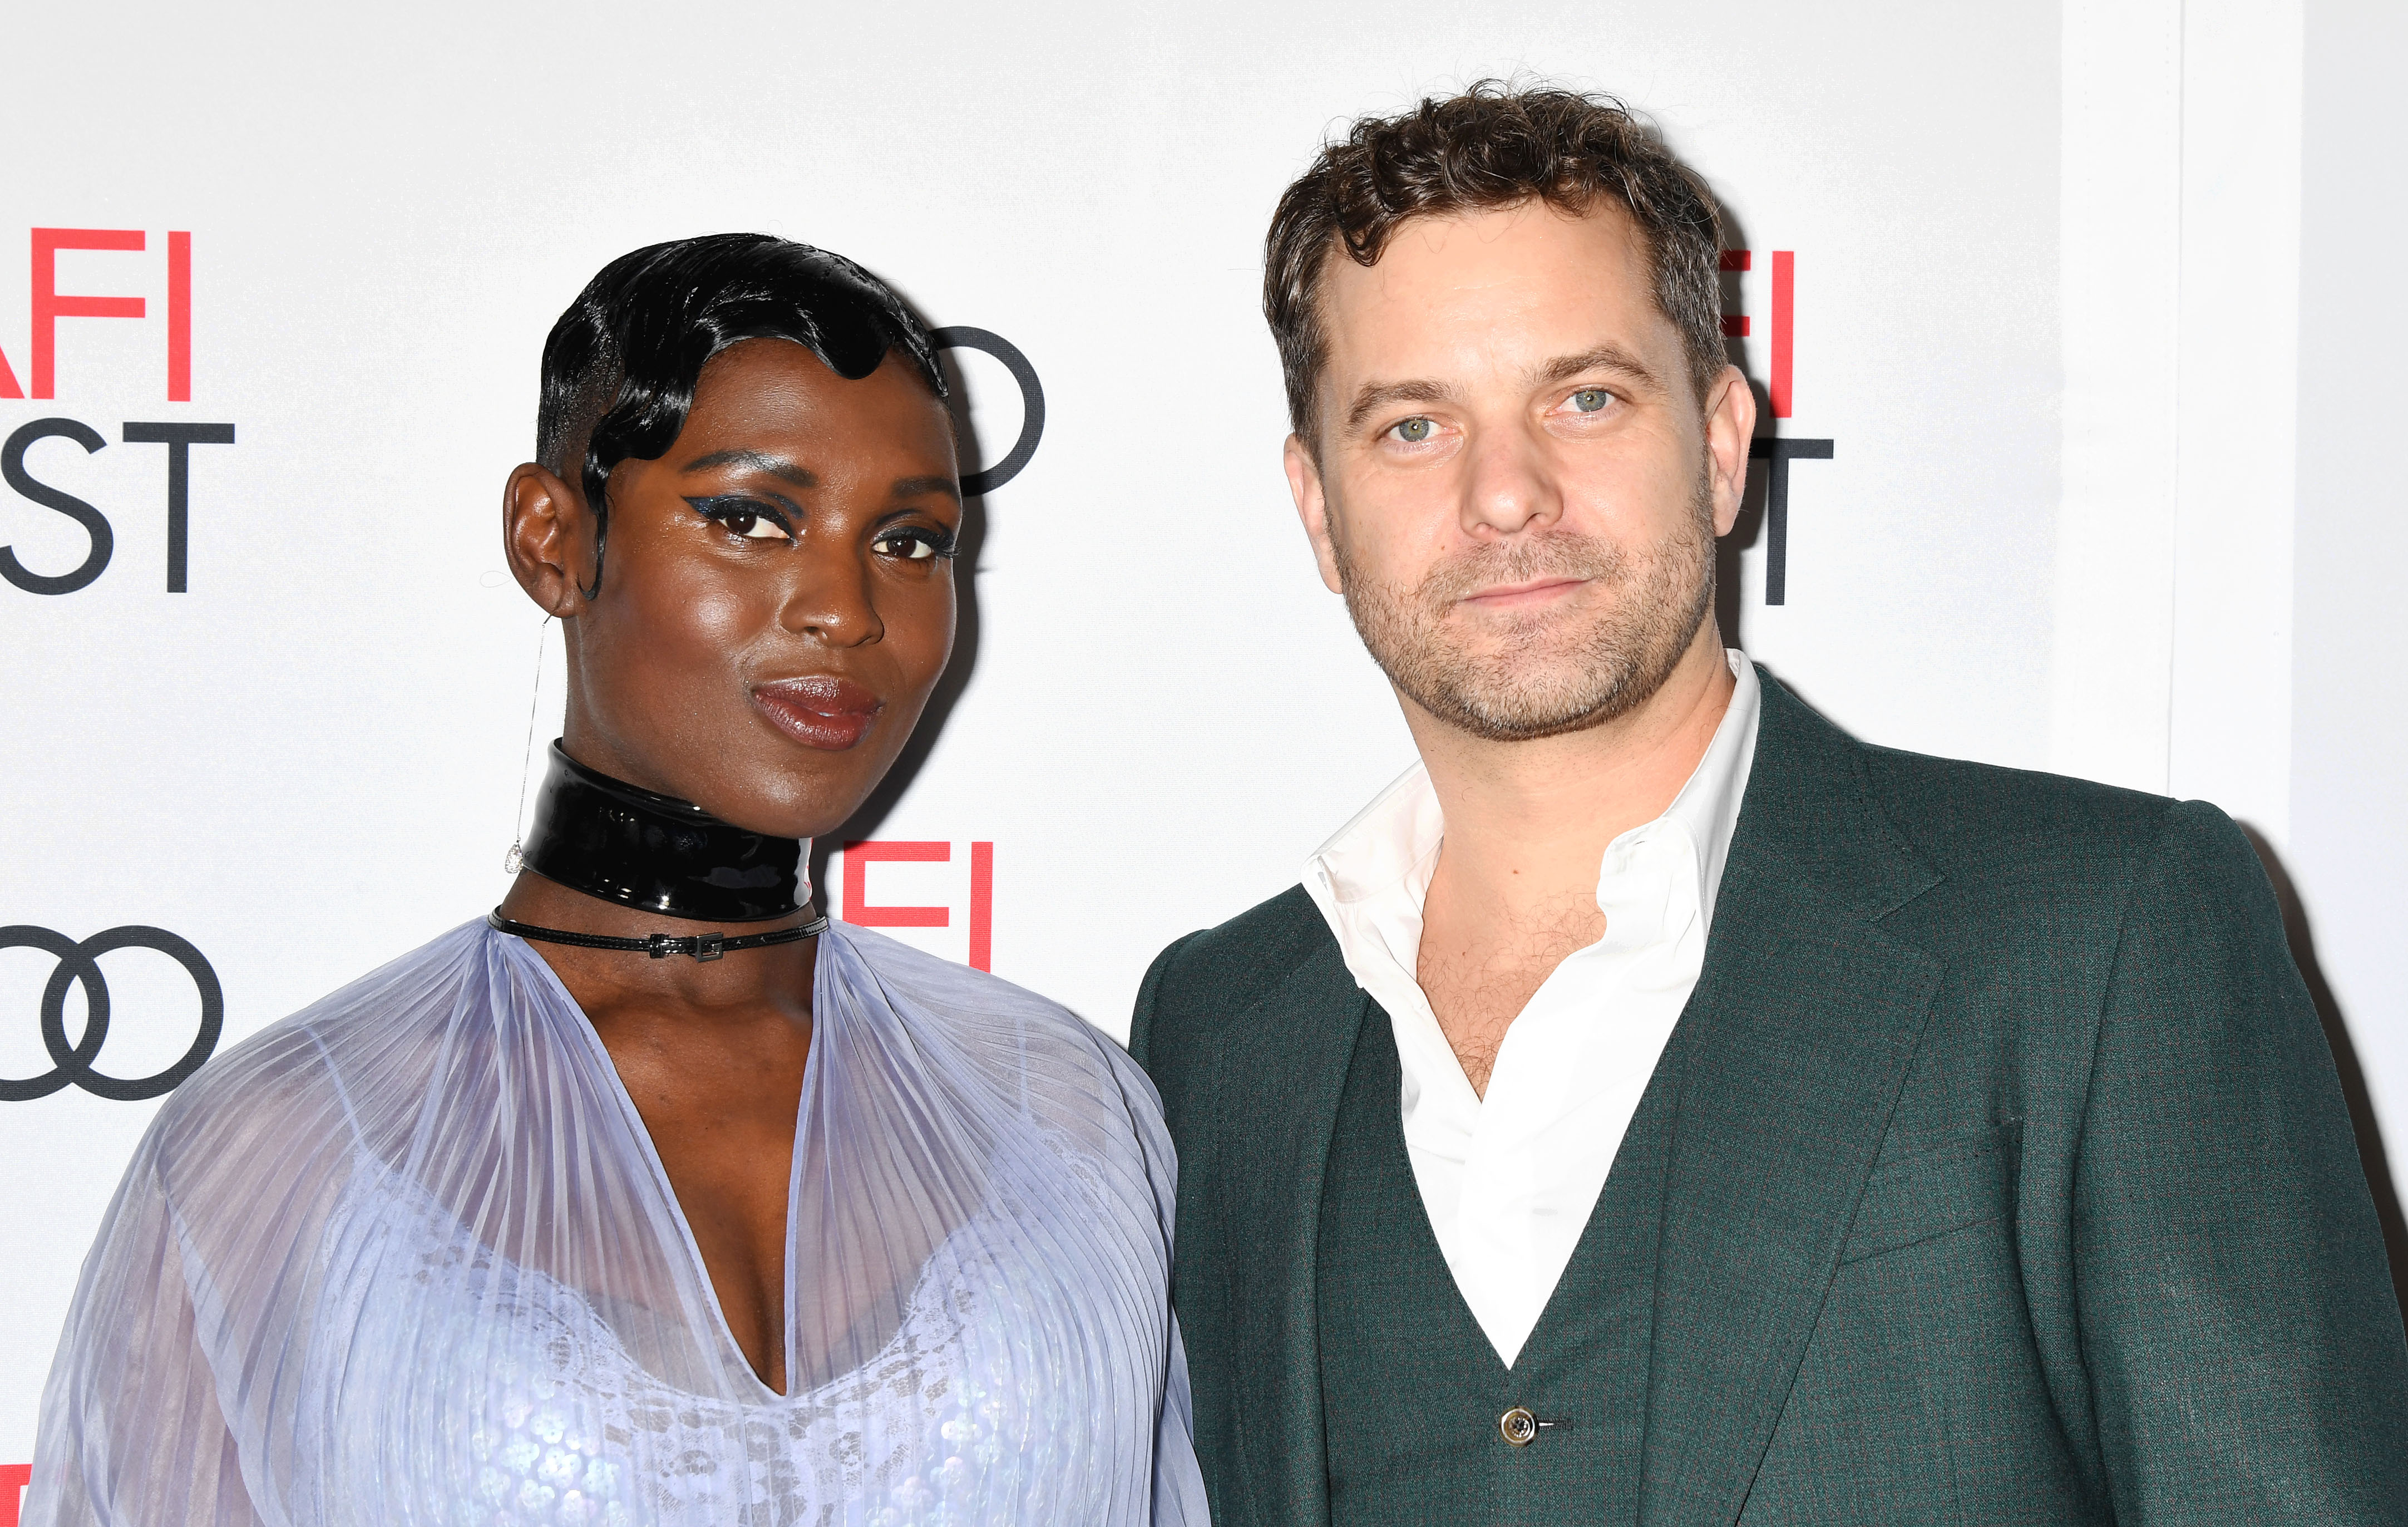 Aryan Interracial White Pussy - Baby Abroad: Jodie Turner-Smith And Joshua Jackson Don't Want To Rear Swirl  Seeds In Aryan-Ascendant Amerikkka - Bossip